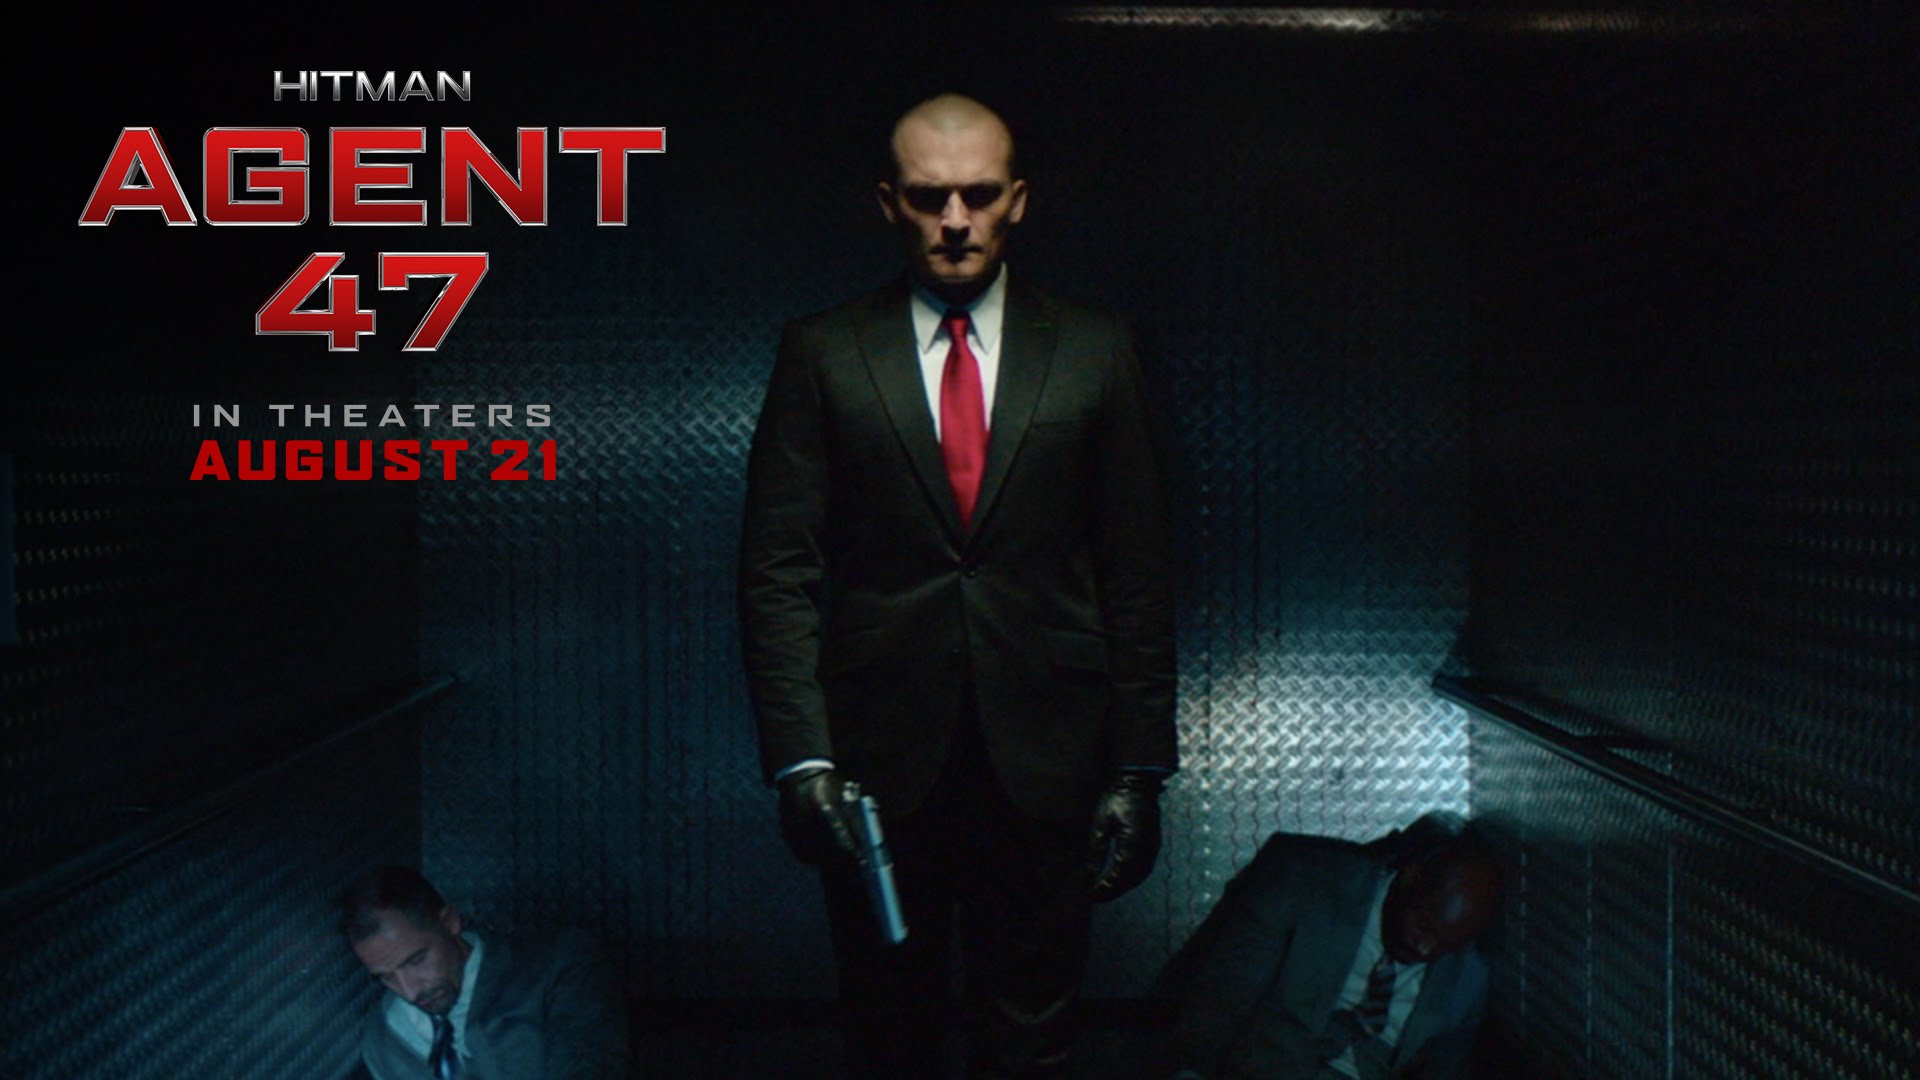 agent 47 wallpaper,movie,suit,font,darkness,fictional character